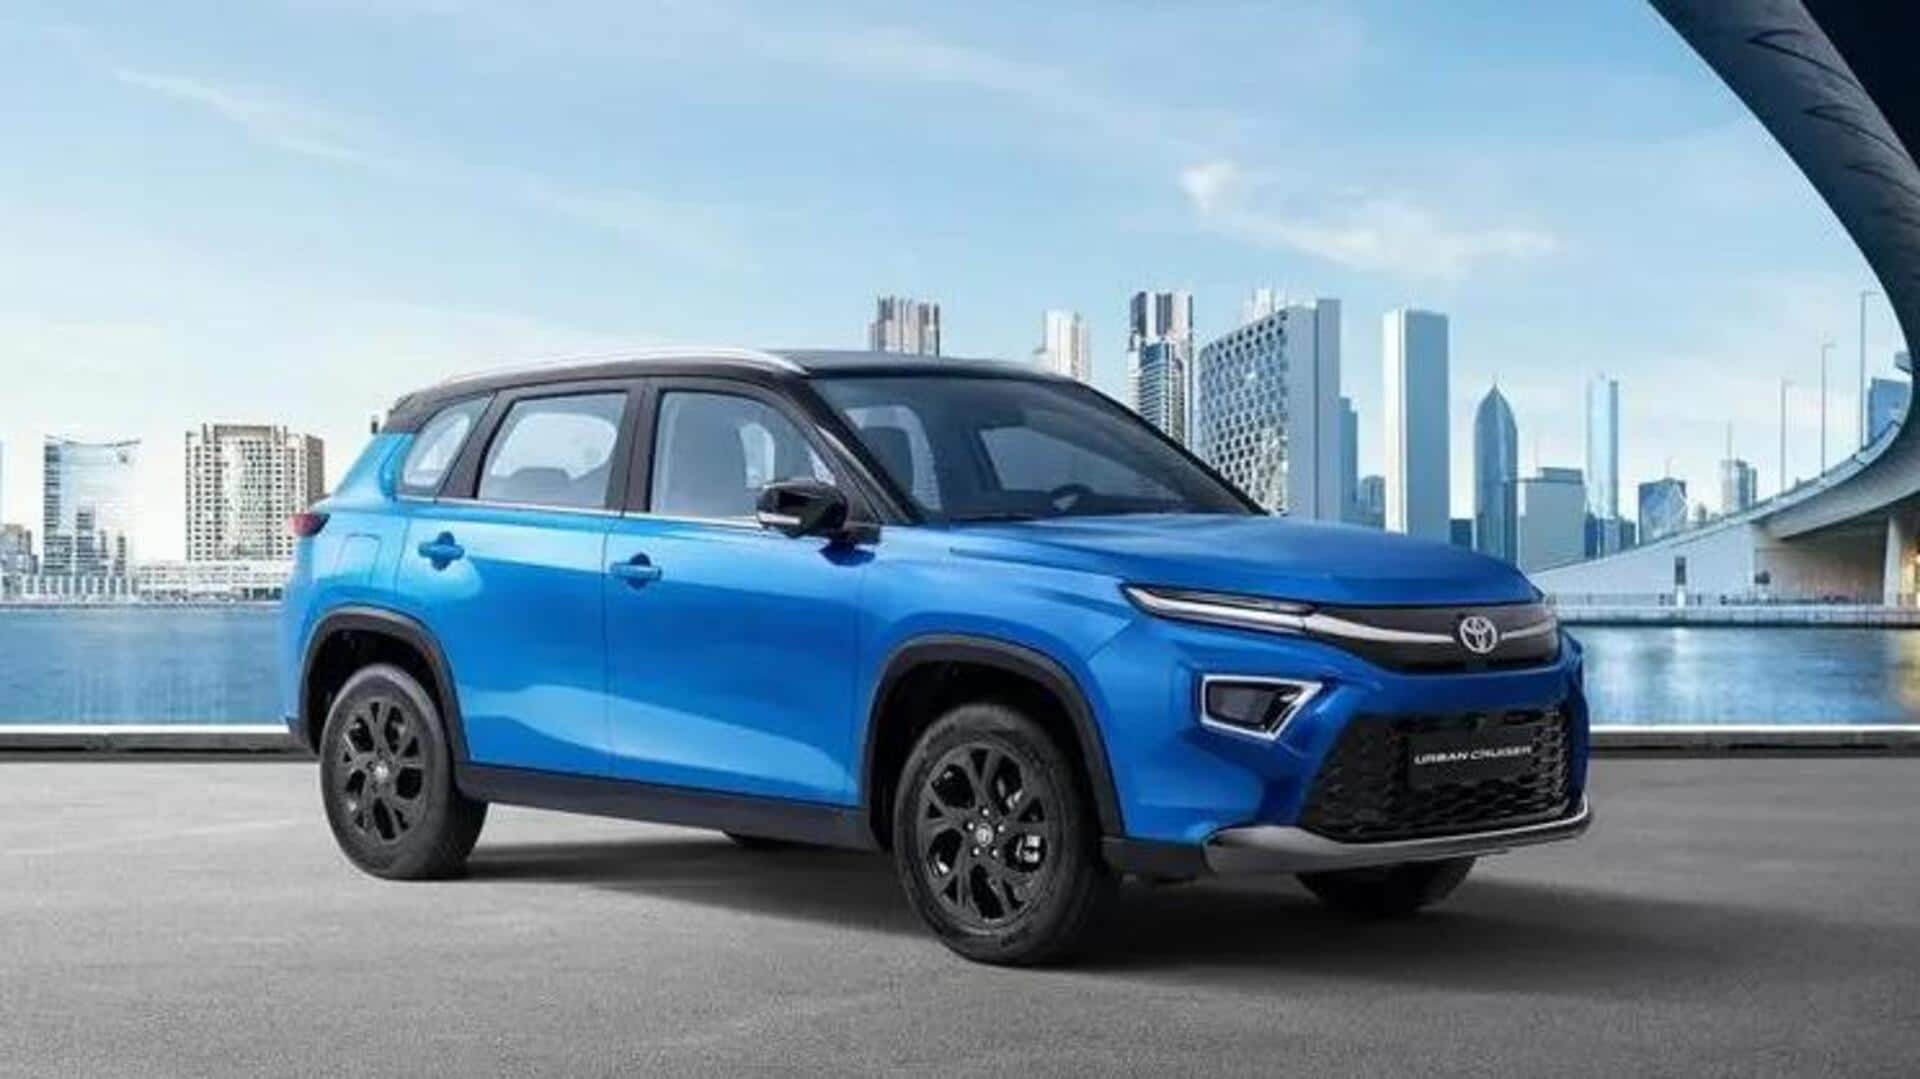 Toyota's new mid-size SUV in India will rival Mahindra XUV700